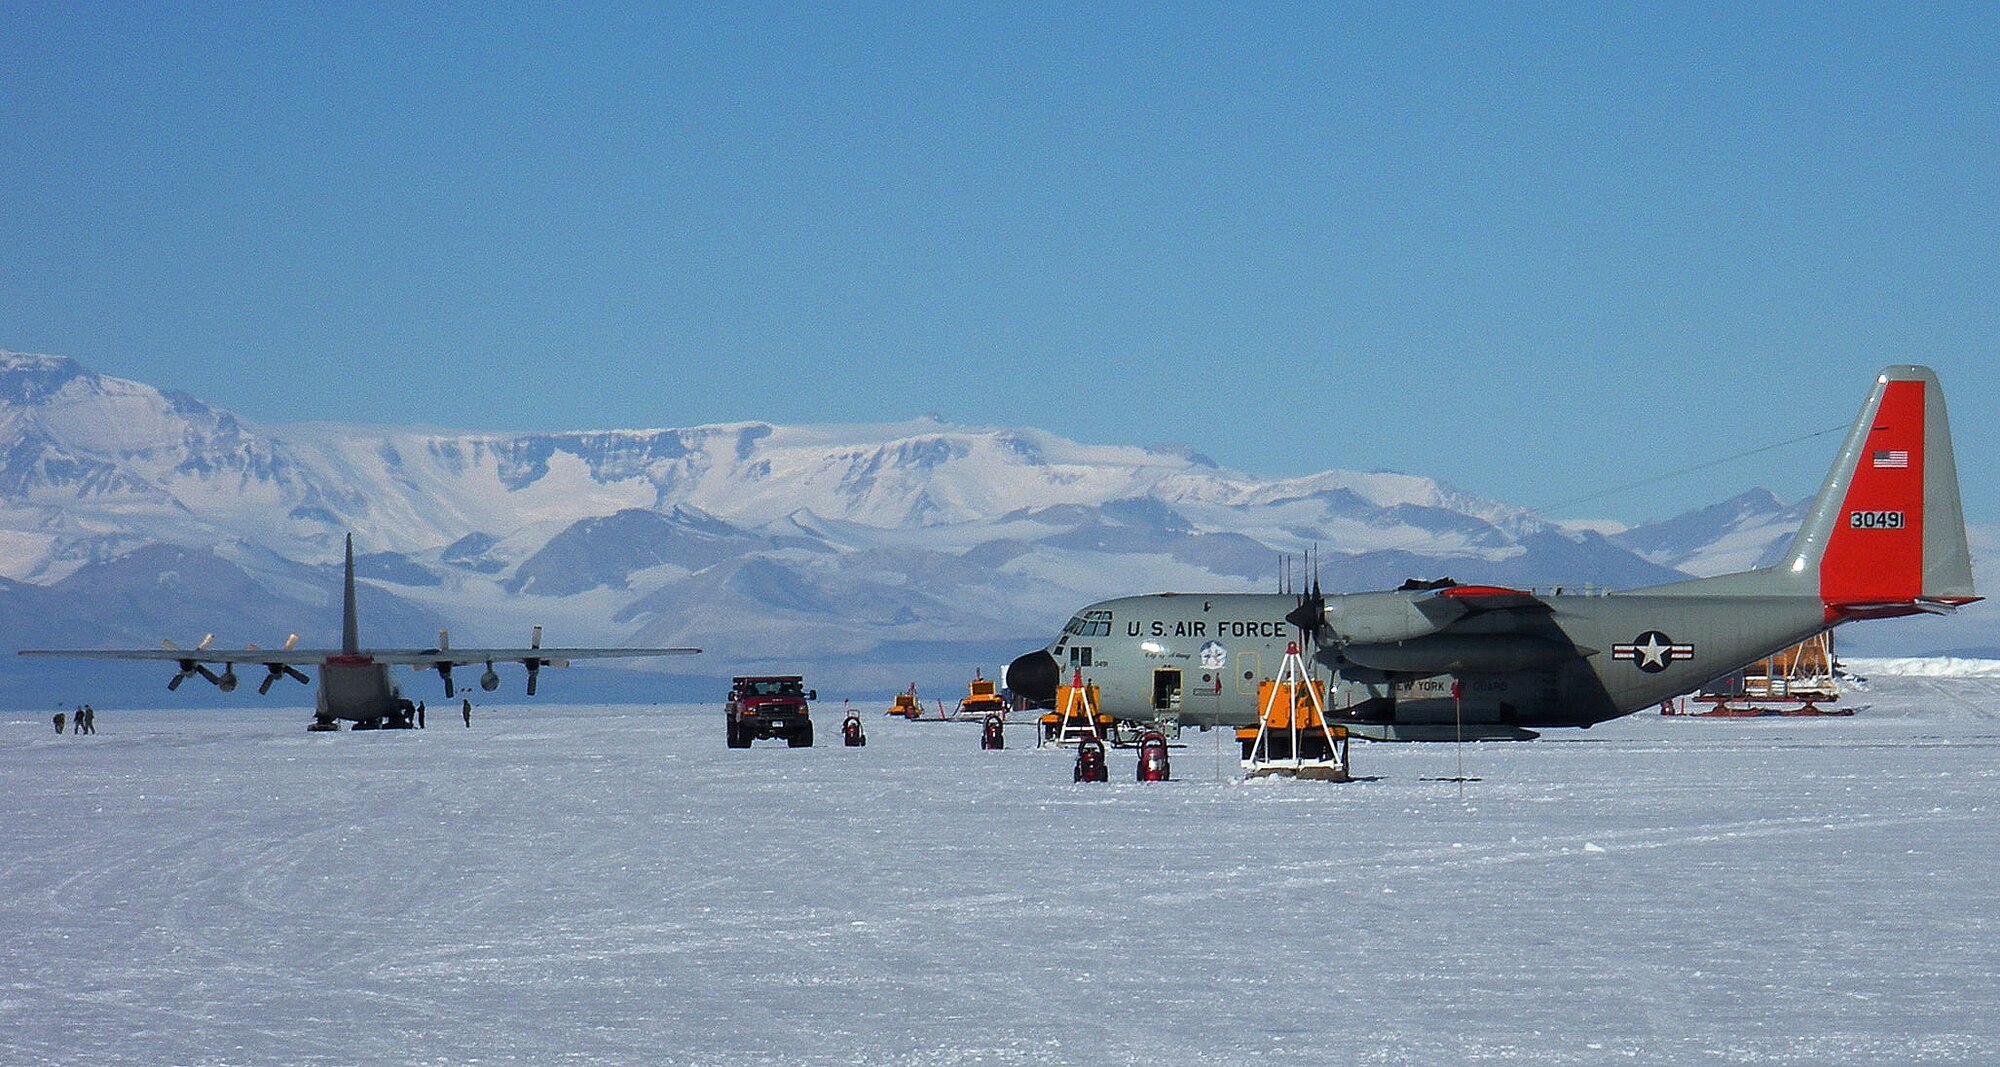 Members of the 18th Aeromedical Evacuation Squadron, Kadena Air Base, Japan,  utilized an LC-130 Hercules to transport patients in need of urgent medical care. The members conducted medical evacuation missions over a three-month period at McMurdo Station, Antarctica.
(U.S. Air Force courtesy photo)